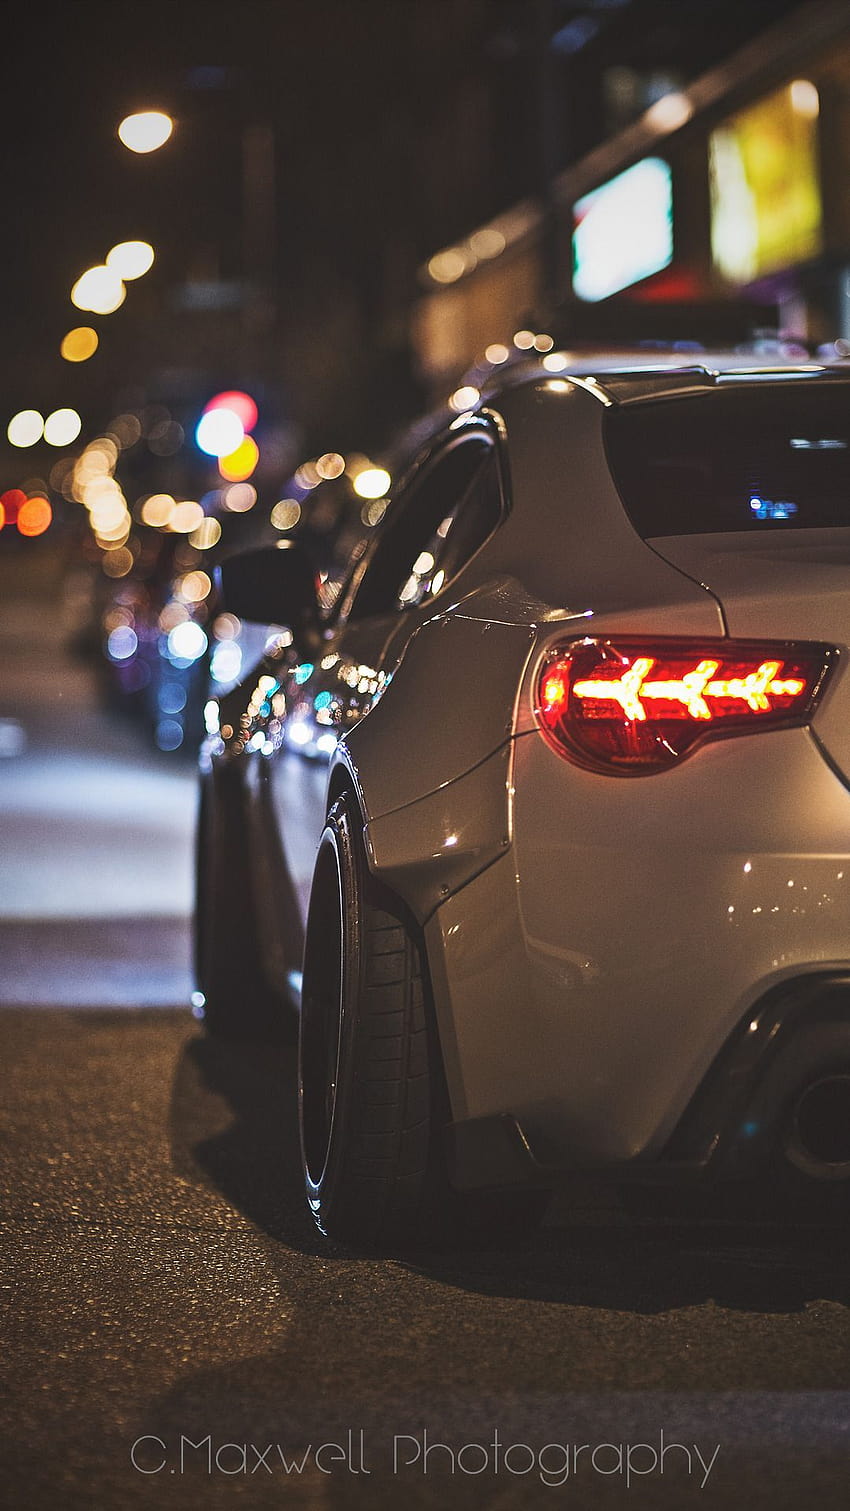 frs86 86 gt86 toyota gt86 gt86lifestyle widebody rocketbunny, brz night graphy HD phone wallpaper